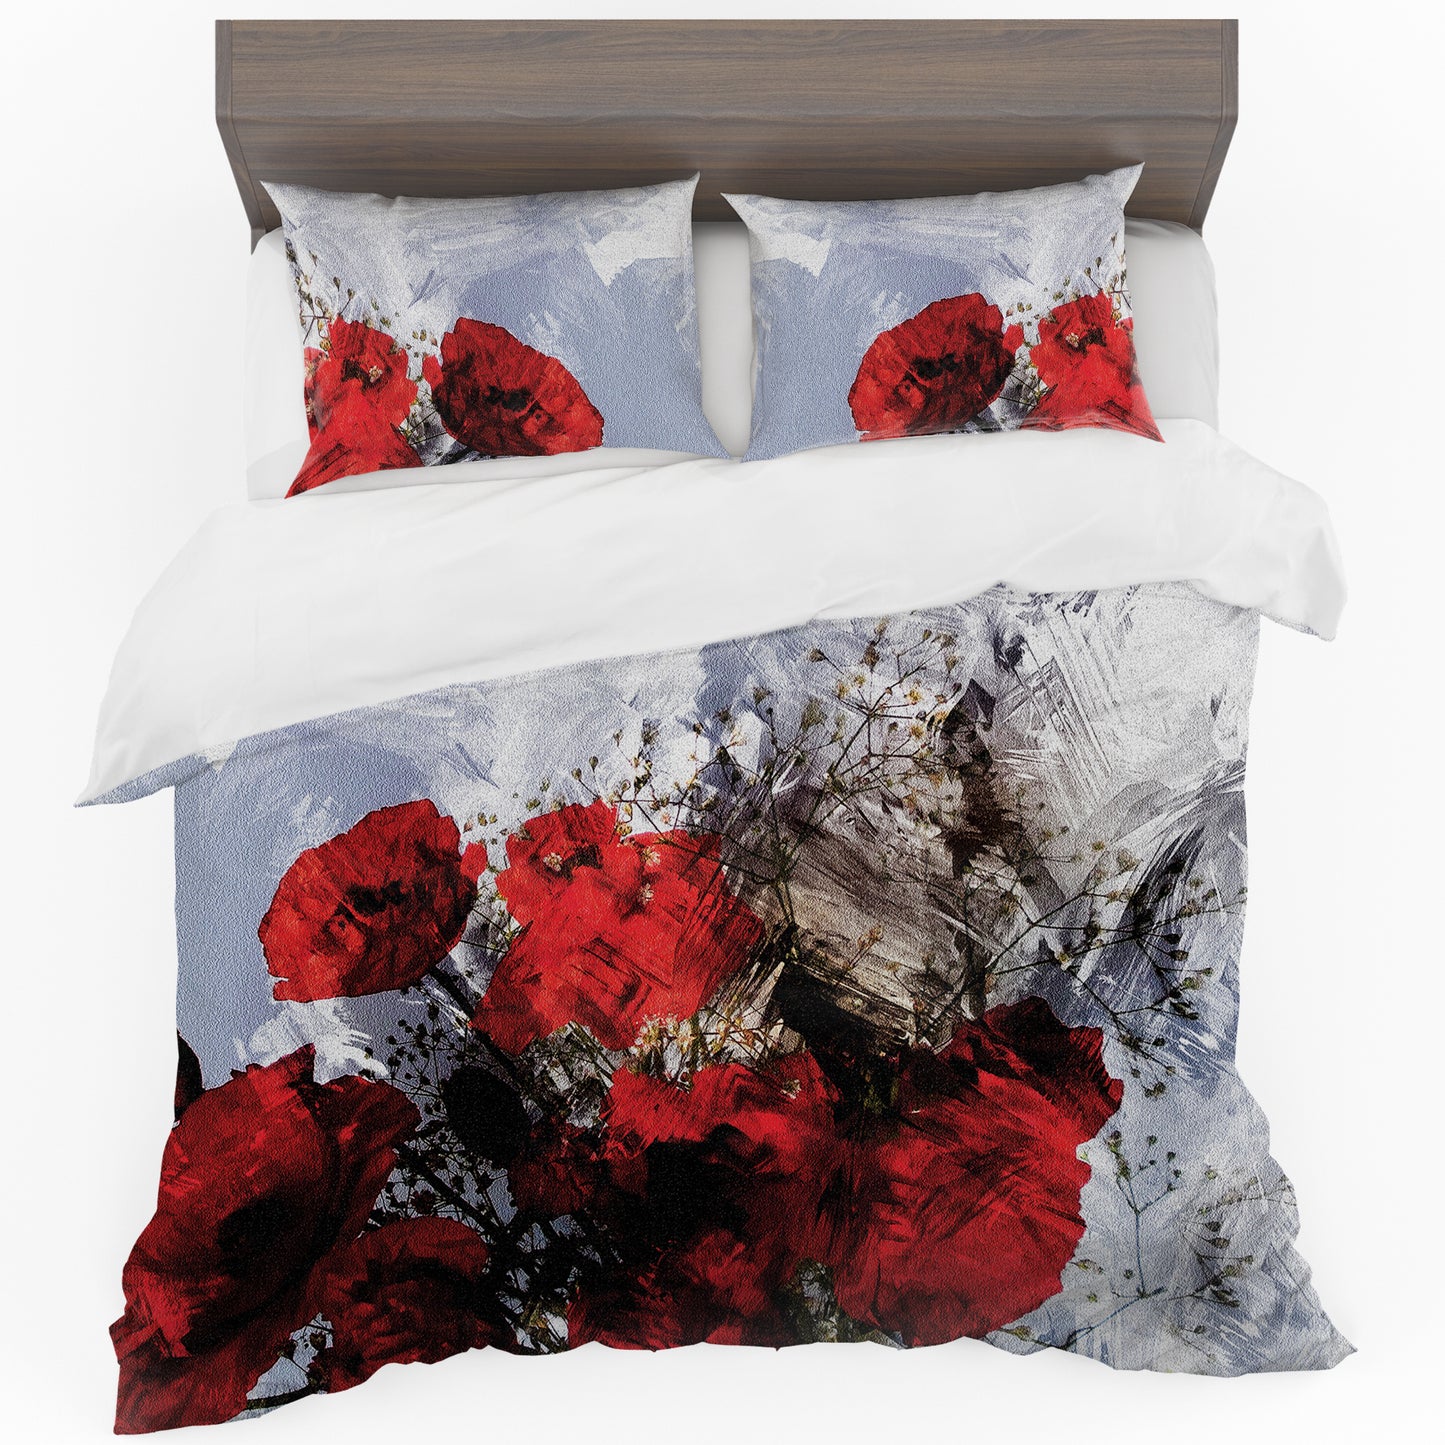 Painted Red Flower on Grunge Background Duvet Cover Set